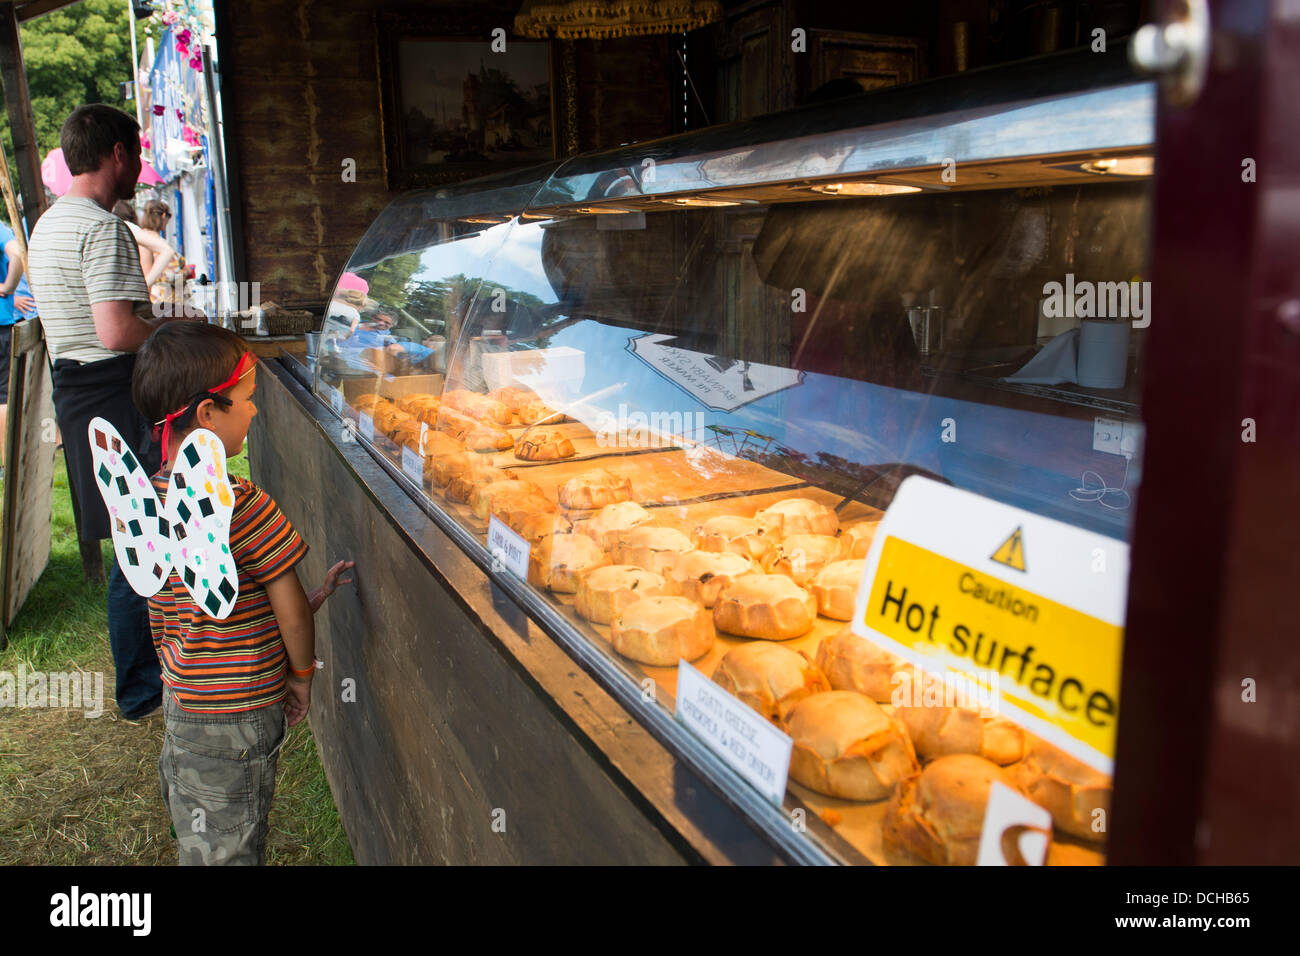 Crickhowell, Wales, UK. 18th August 2013. Day four of Green Man Festival. A young child looks at some of the food on offer. Credit:  Polly Thomas/Alamy Live News Stock Photo